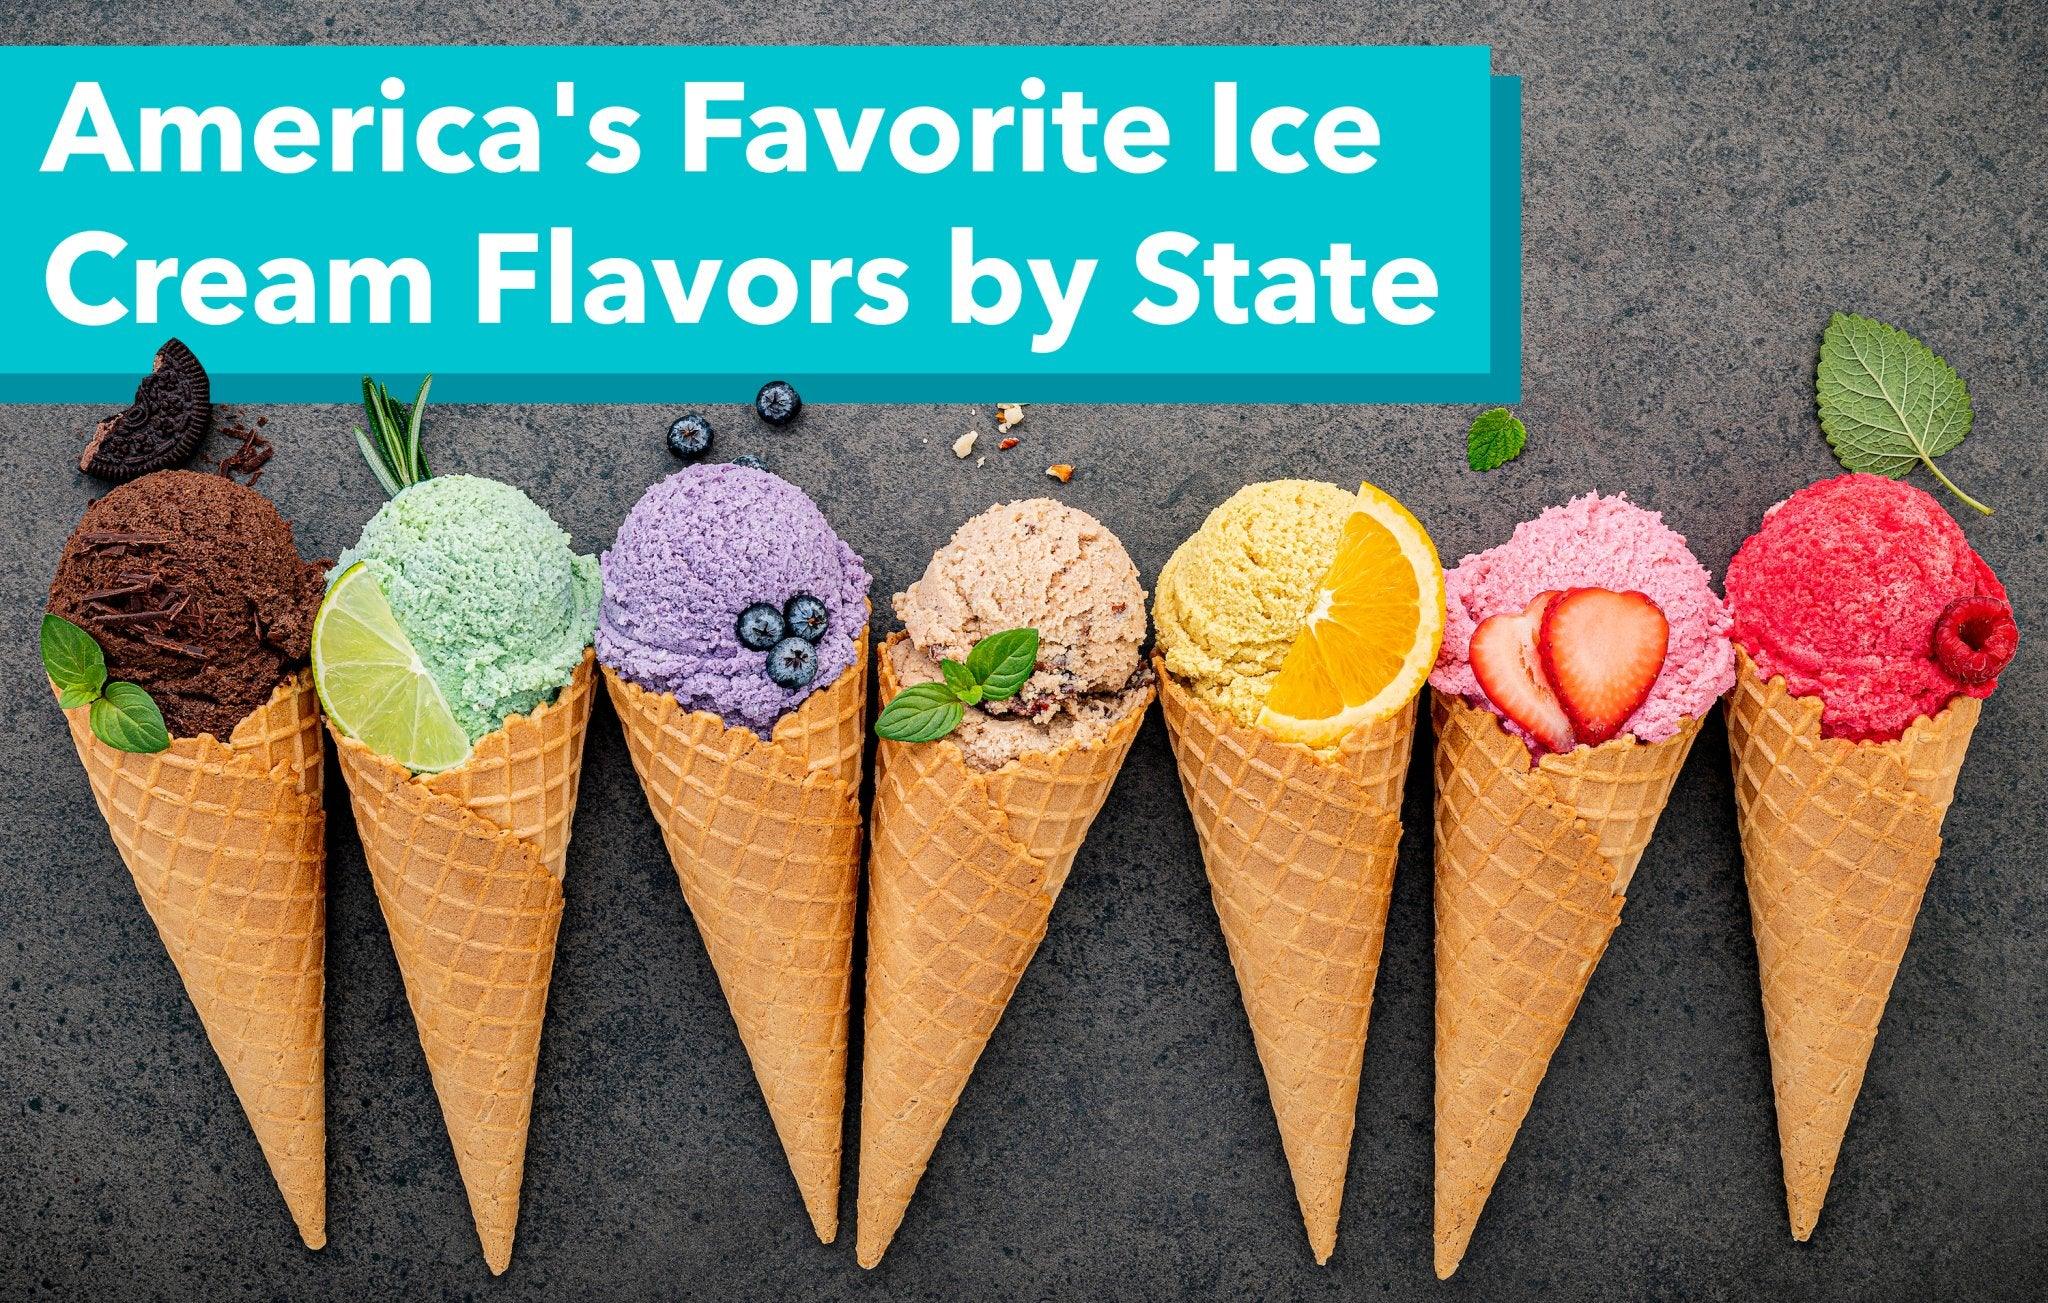 The Most Popular Ice Cream Flavors in Each State